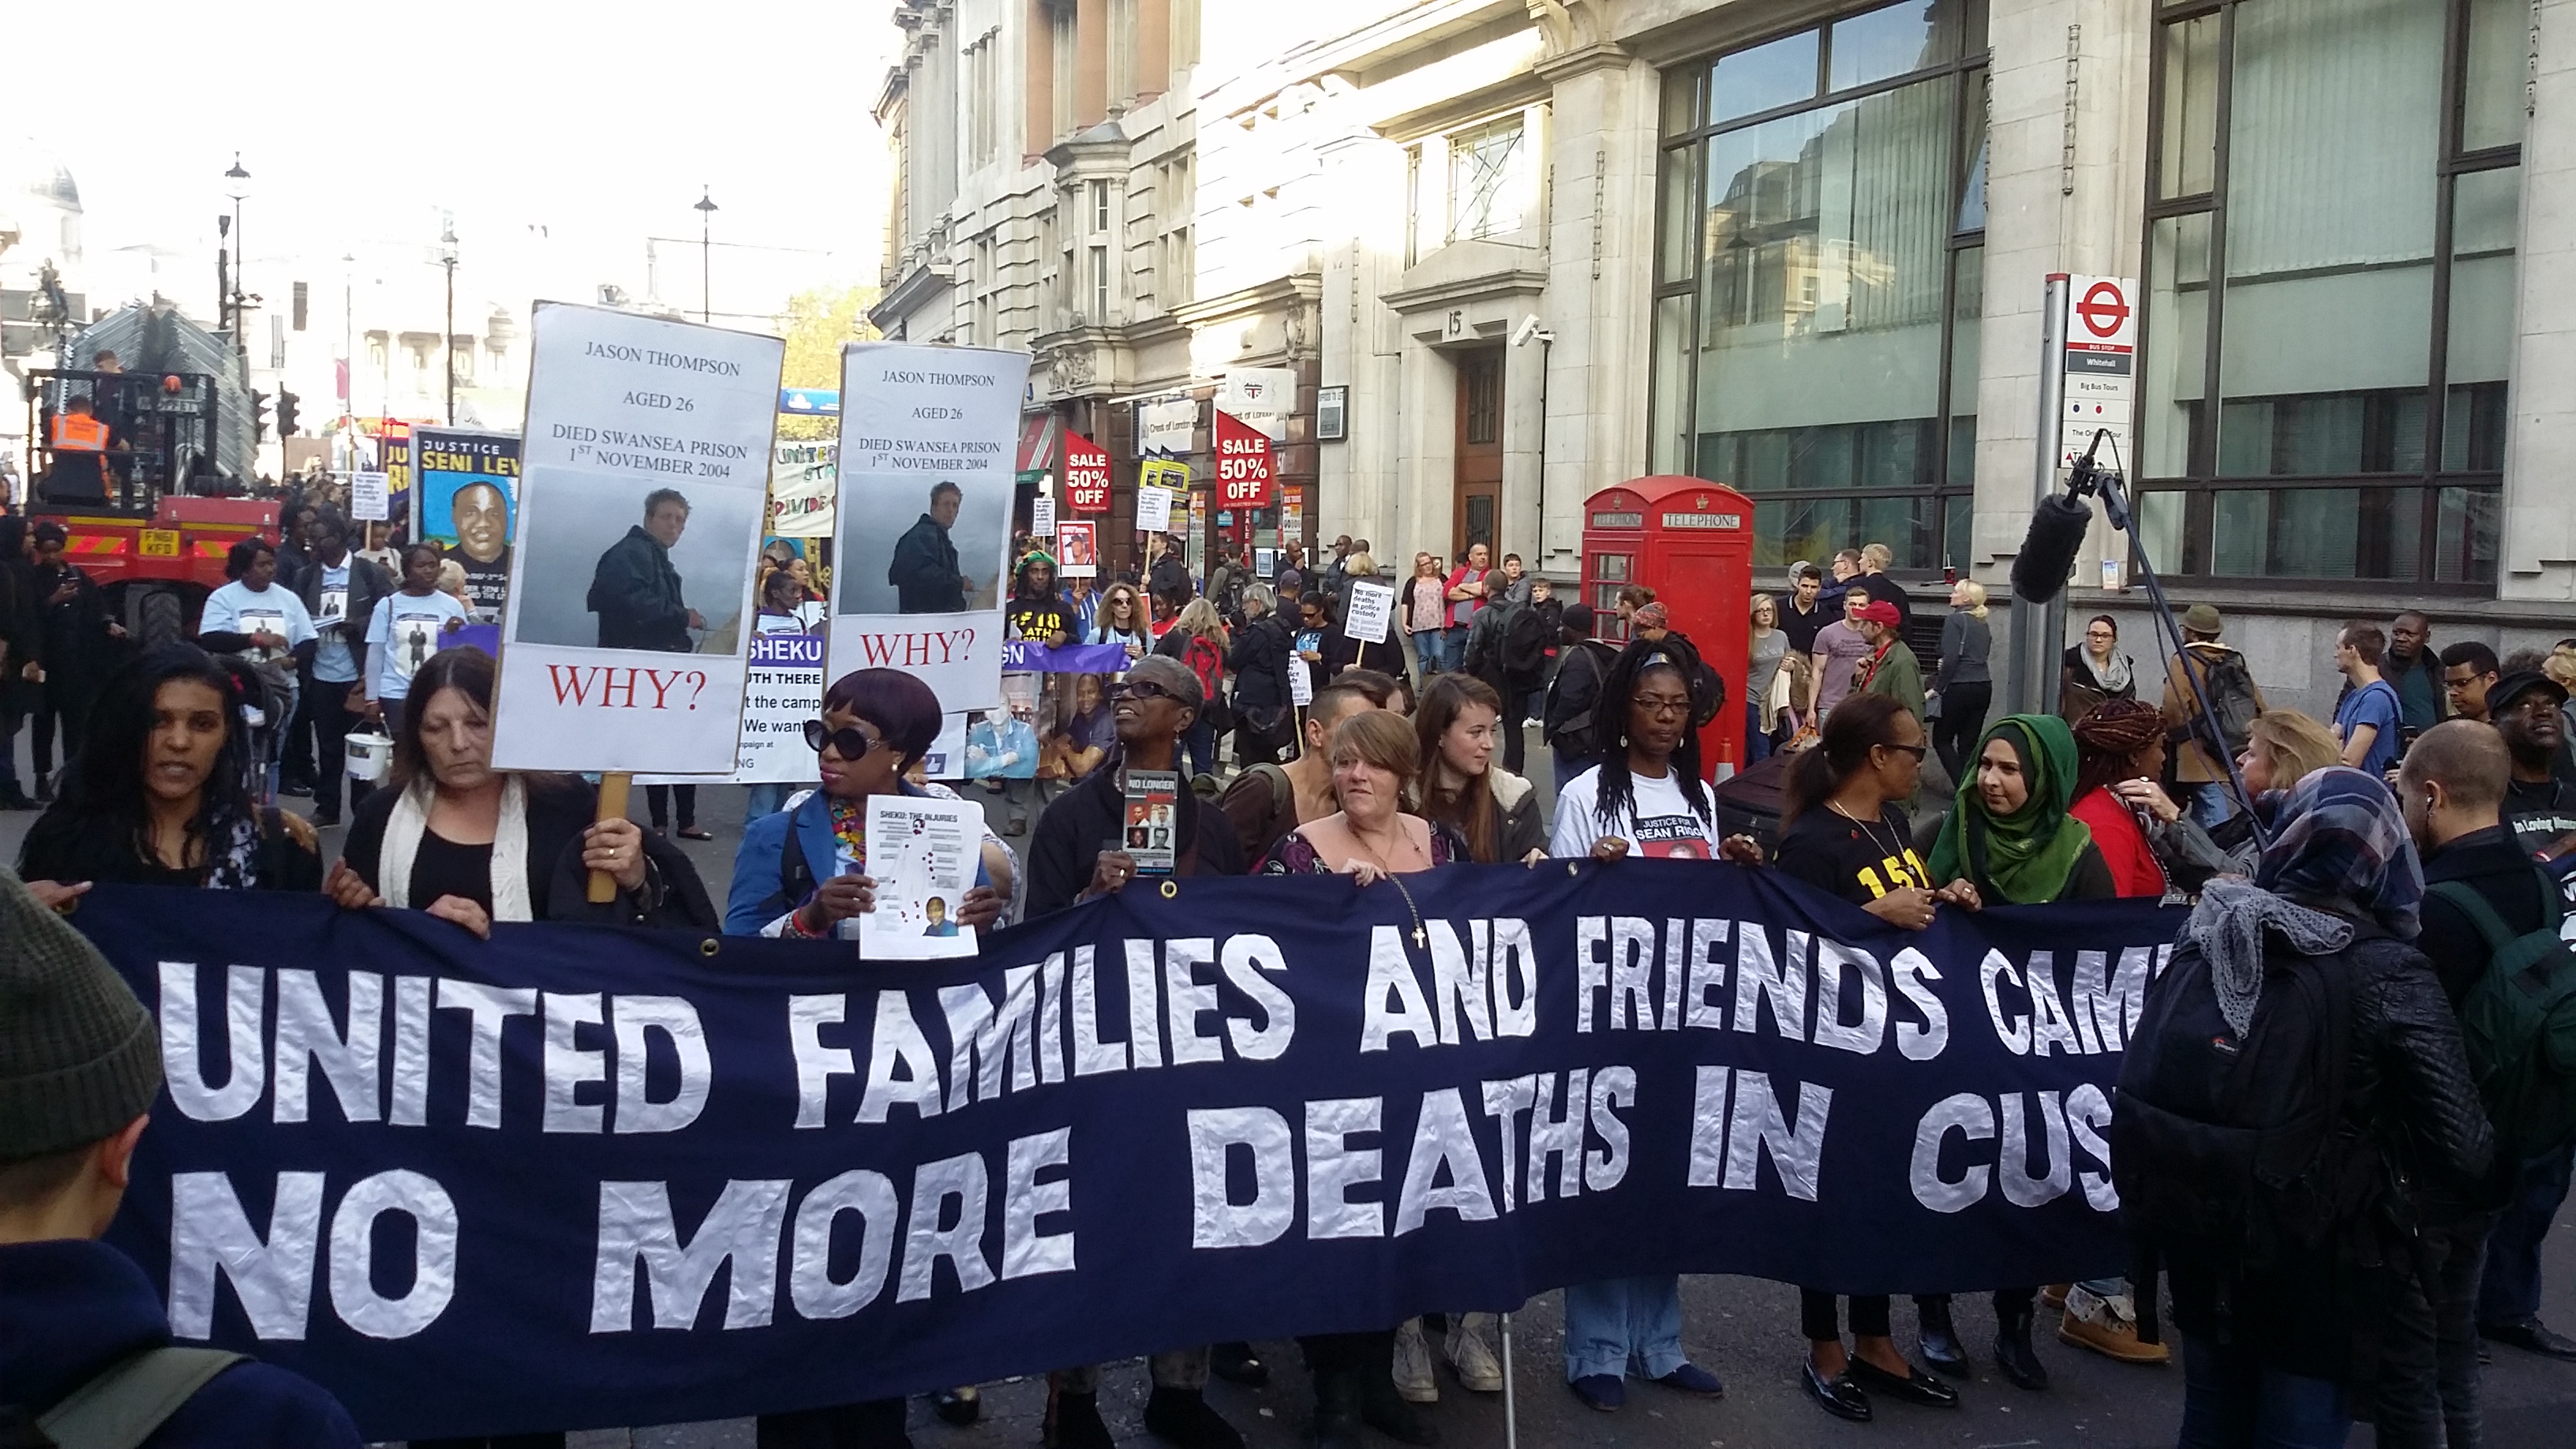 You are currently viewing Love Not Blood Campaign joins families in London, UK